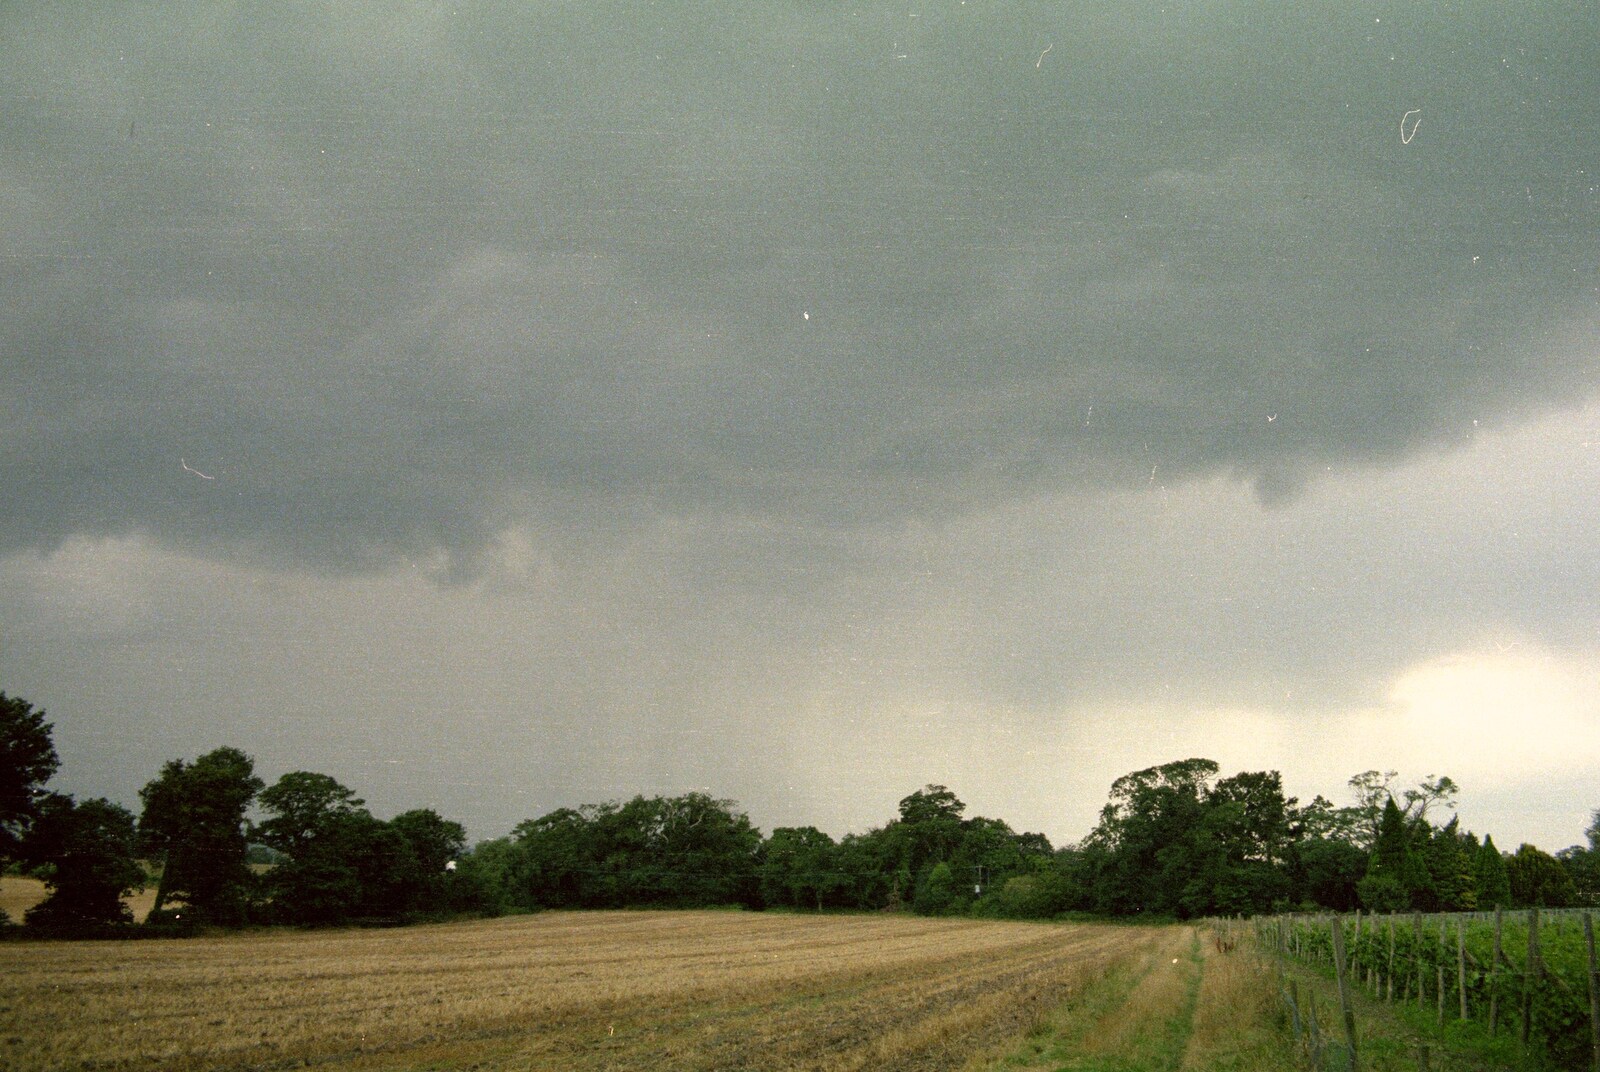 Dark skies over the field next to the vineyard from A Vineyard Miscellany, Bransgore and the New Forest - 18th July 1986